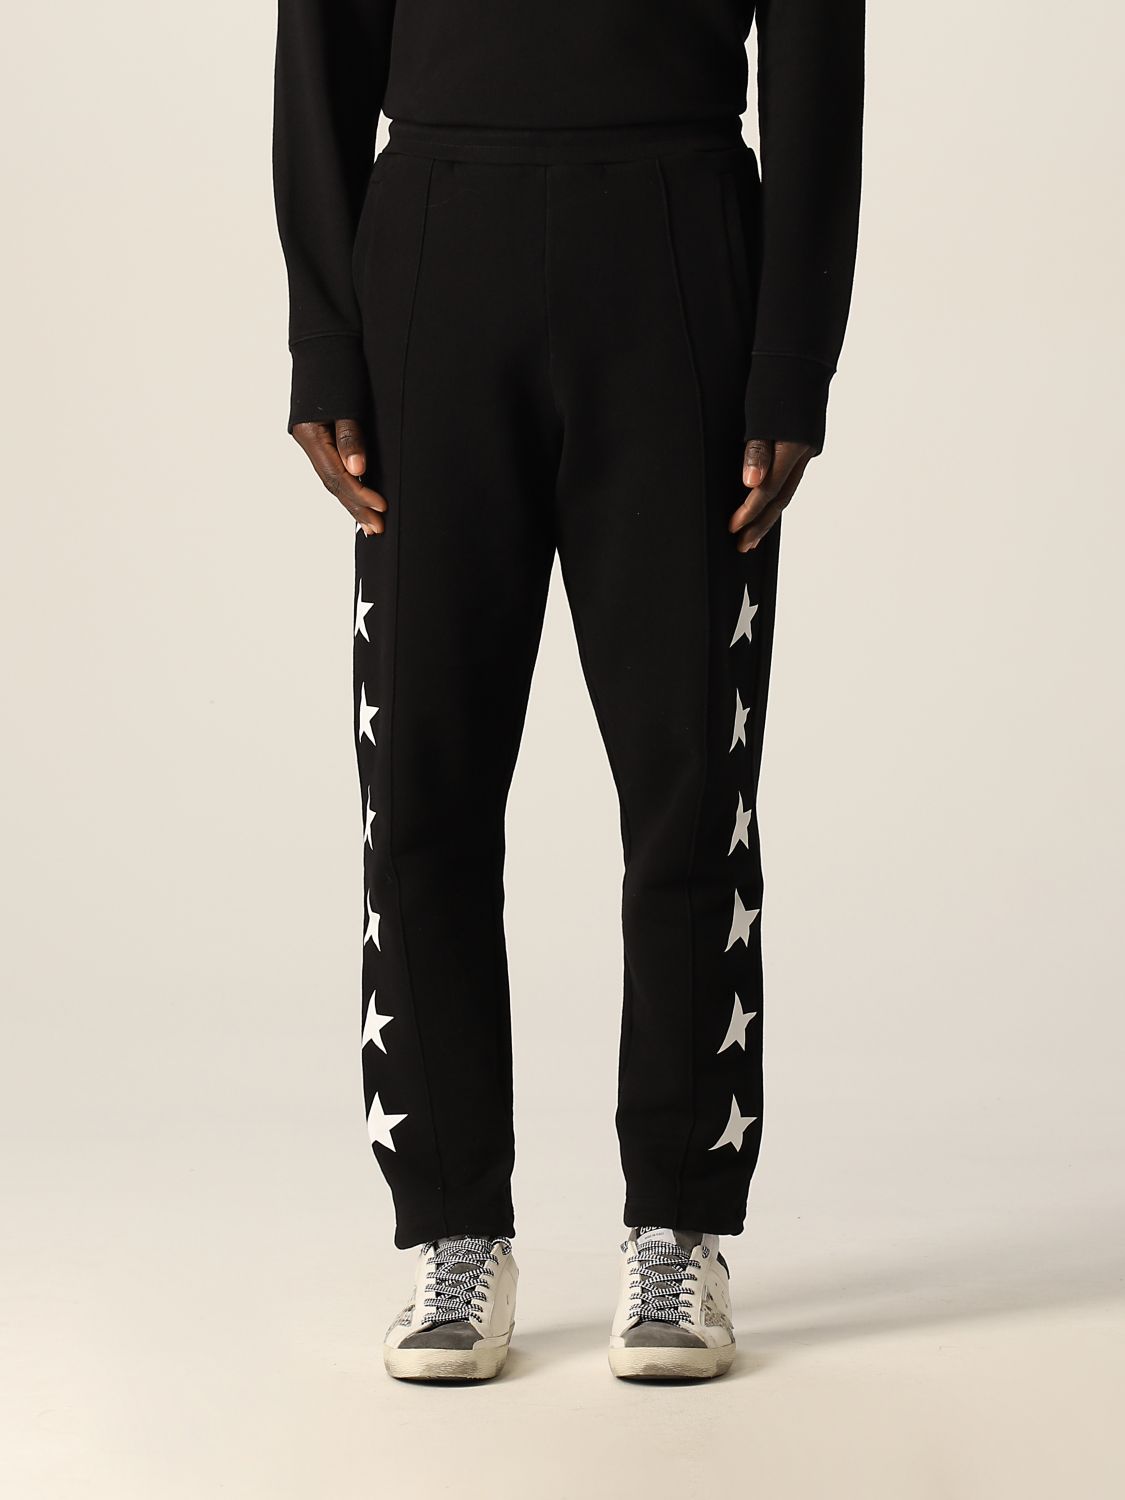 GOLDEN GOOSE: Star collection trousers in cotton - Black | Golden Goose ...